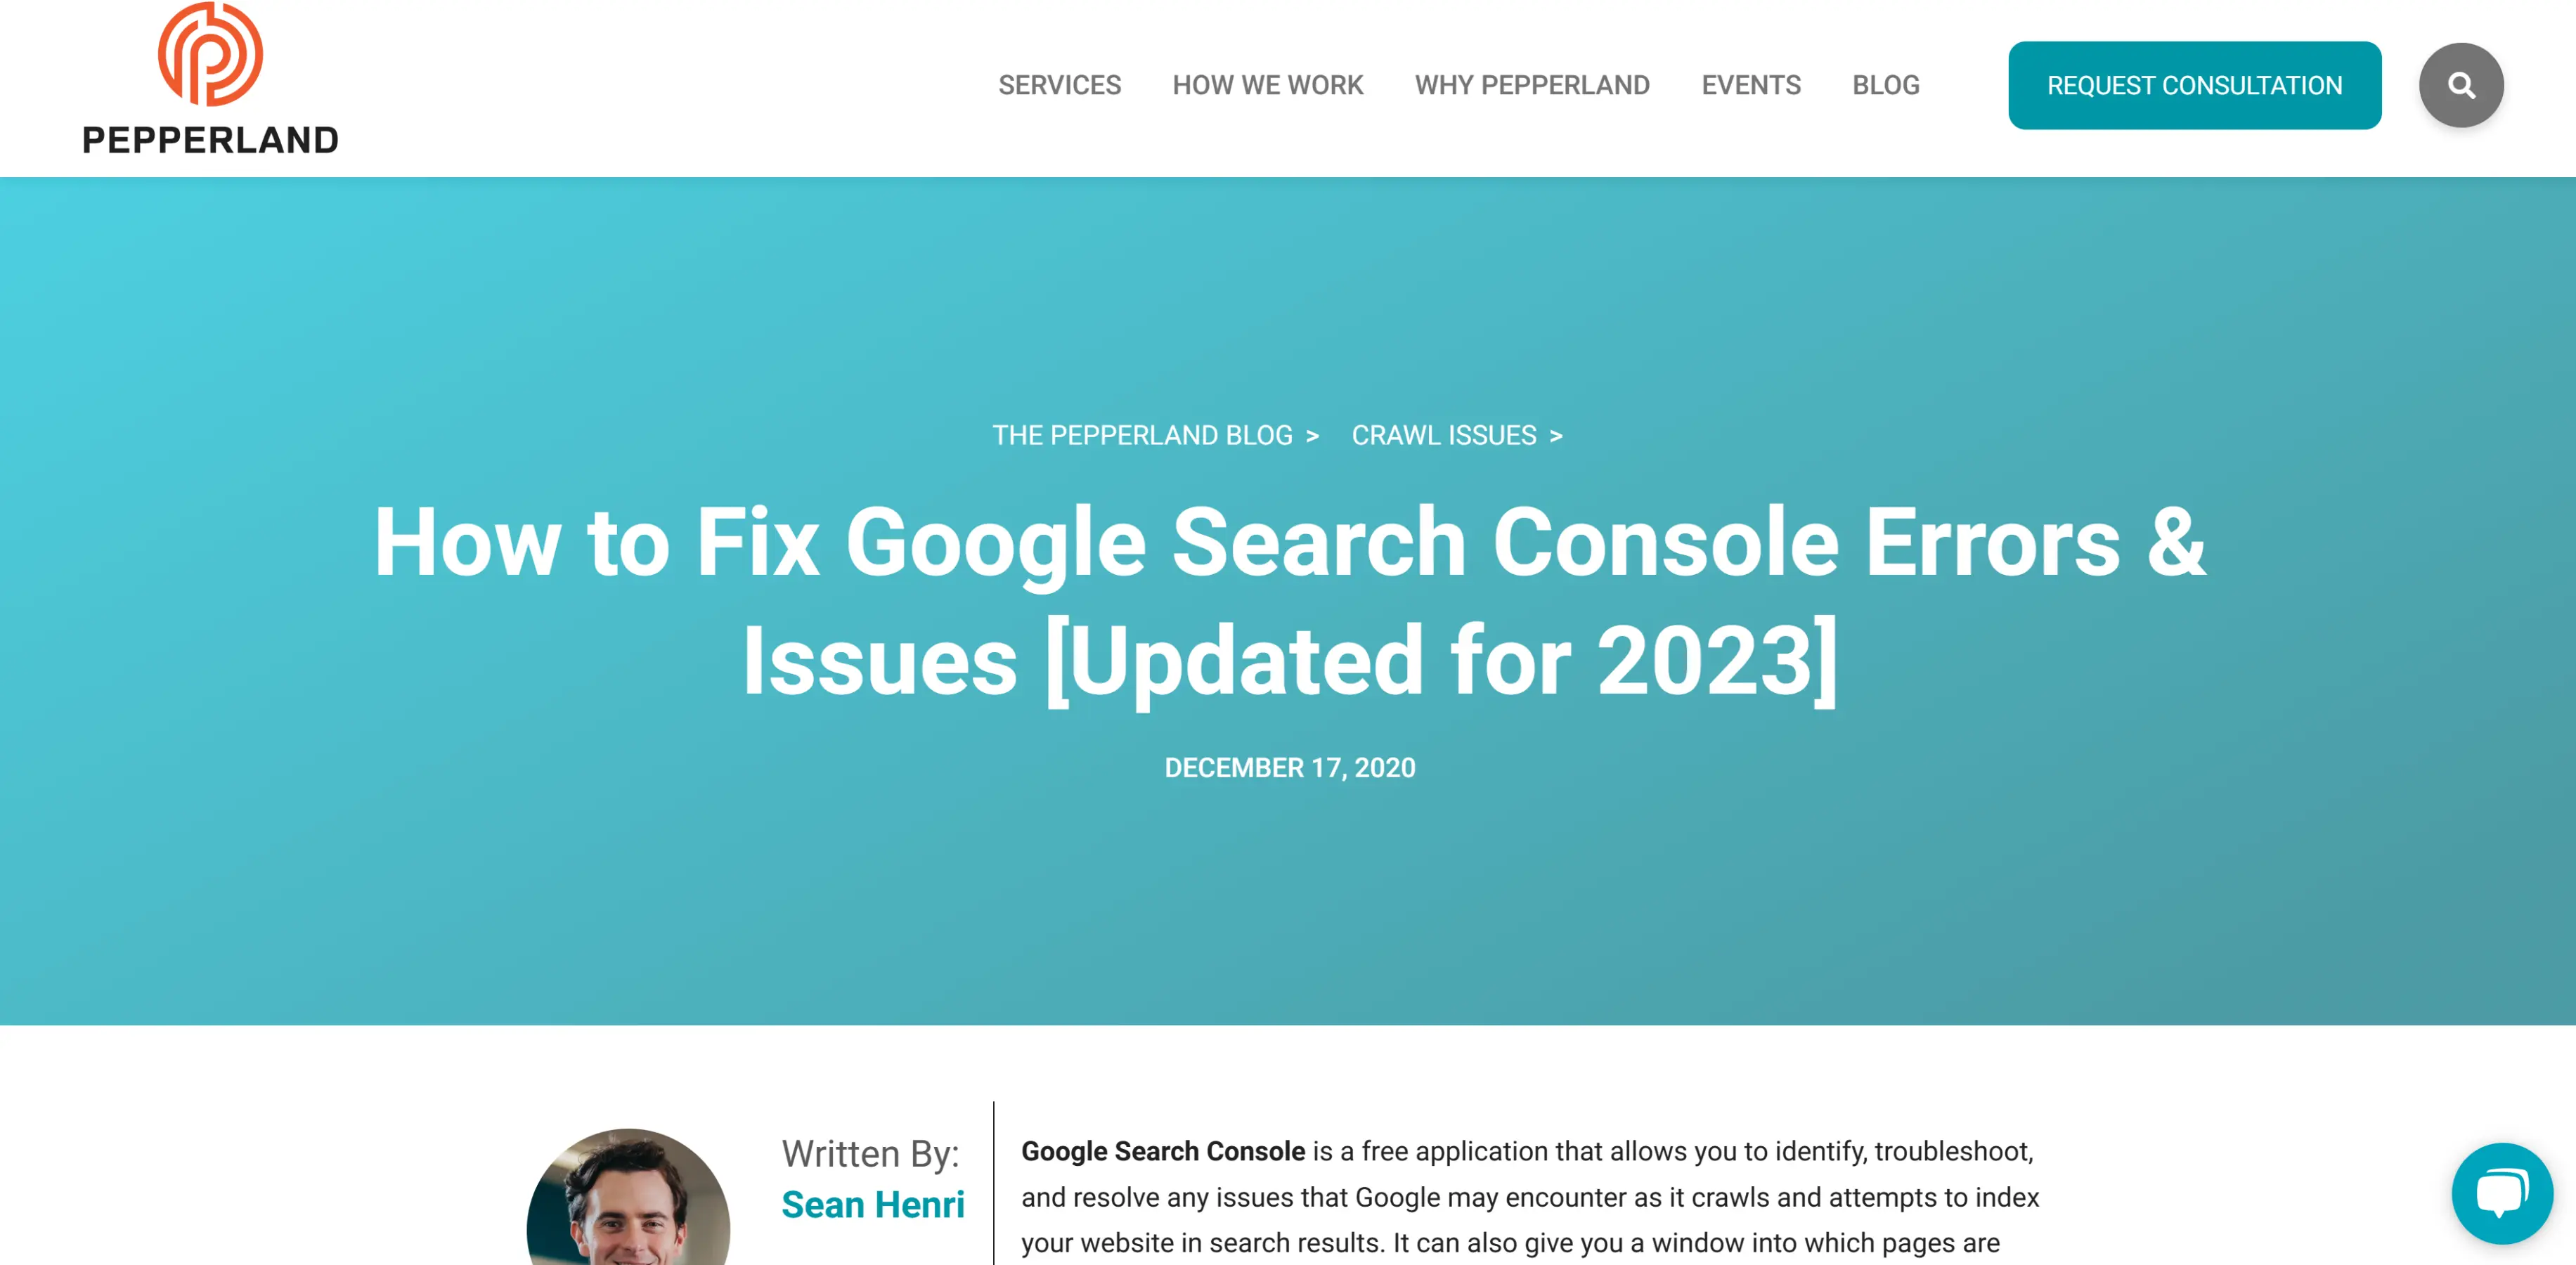 How to Fix Google Search Console Errors